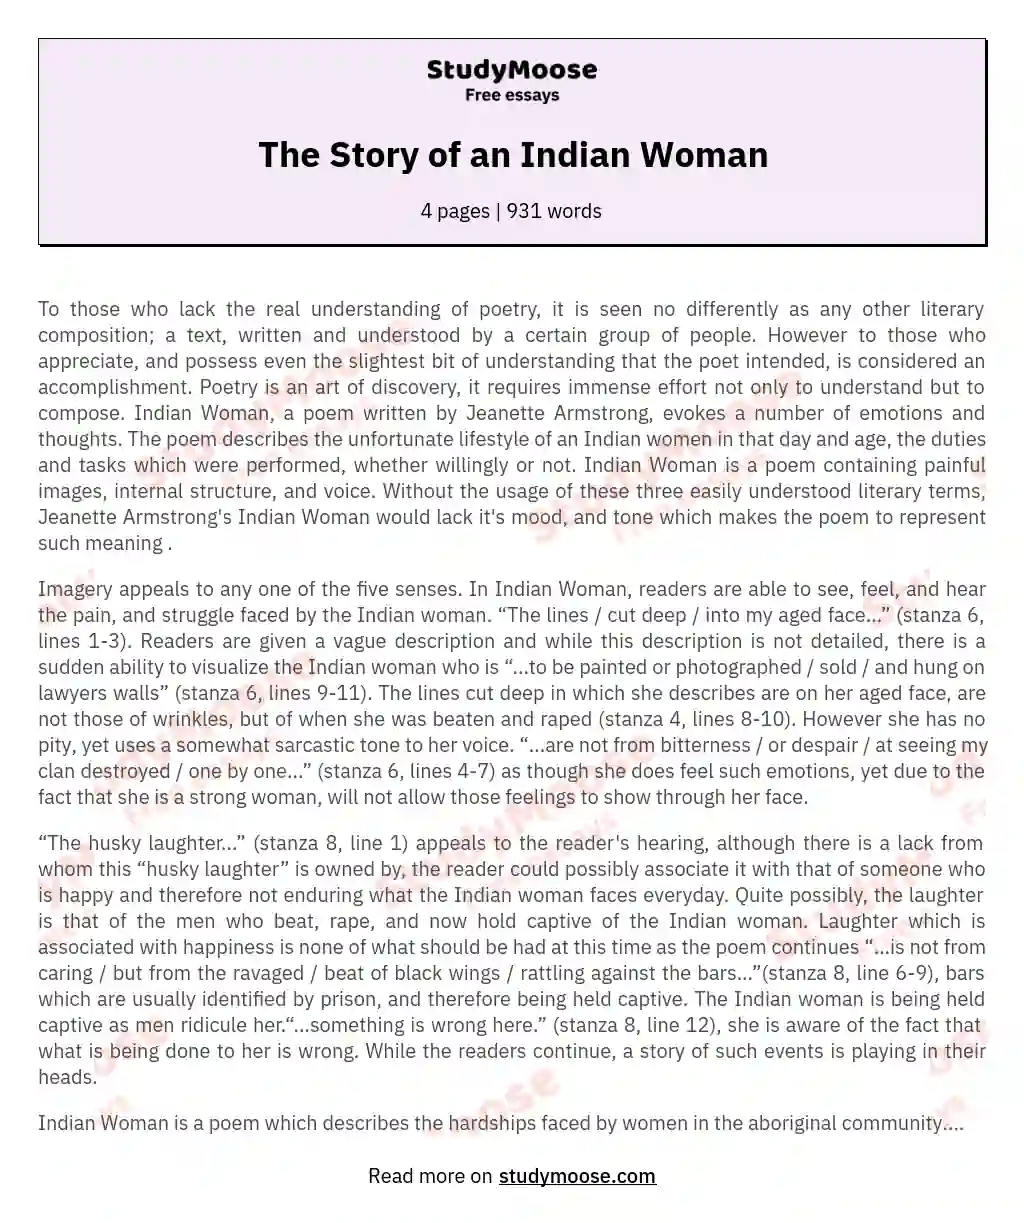 The Story of an Indian Woman essay